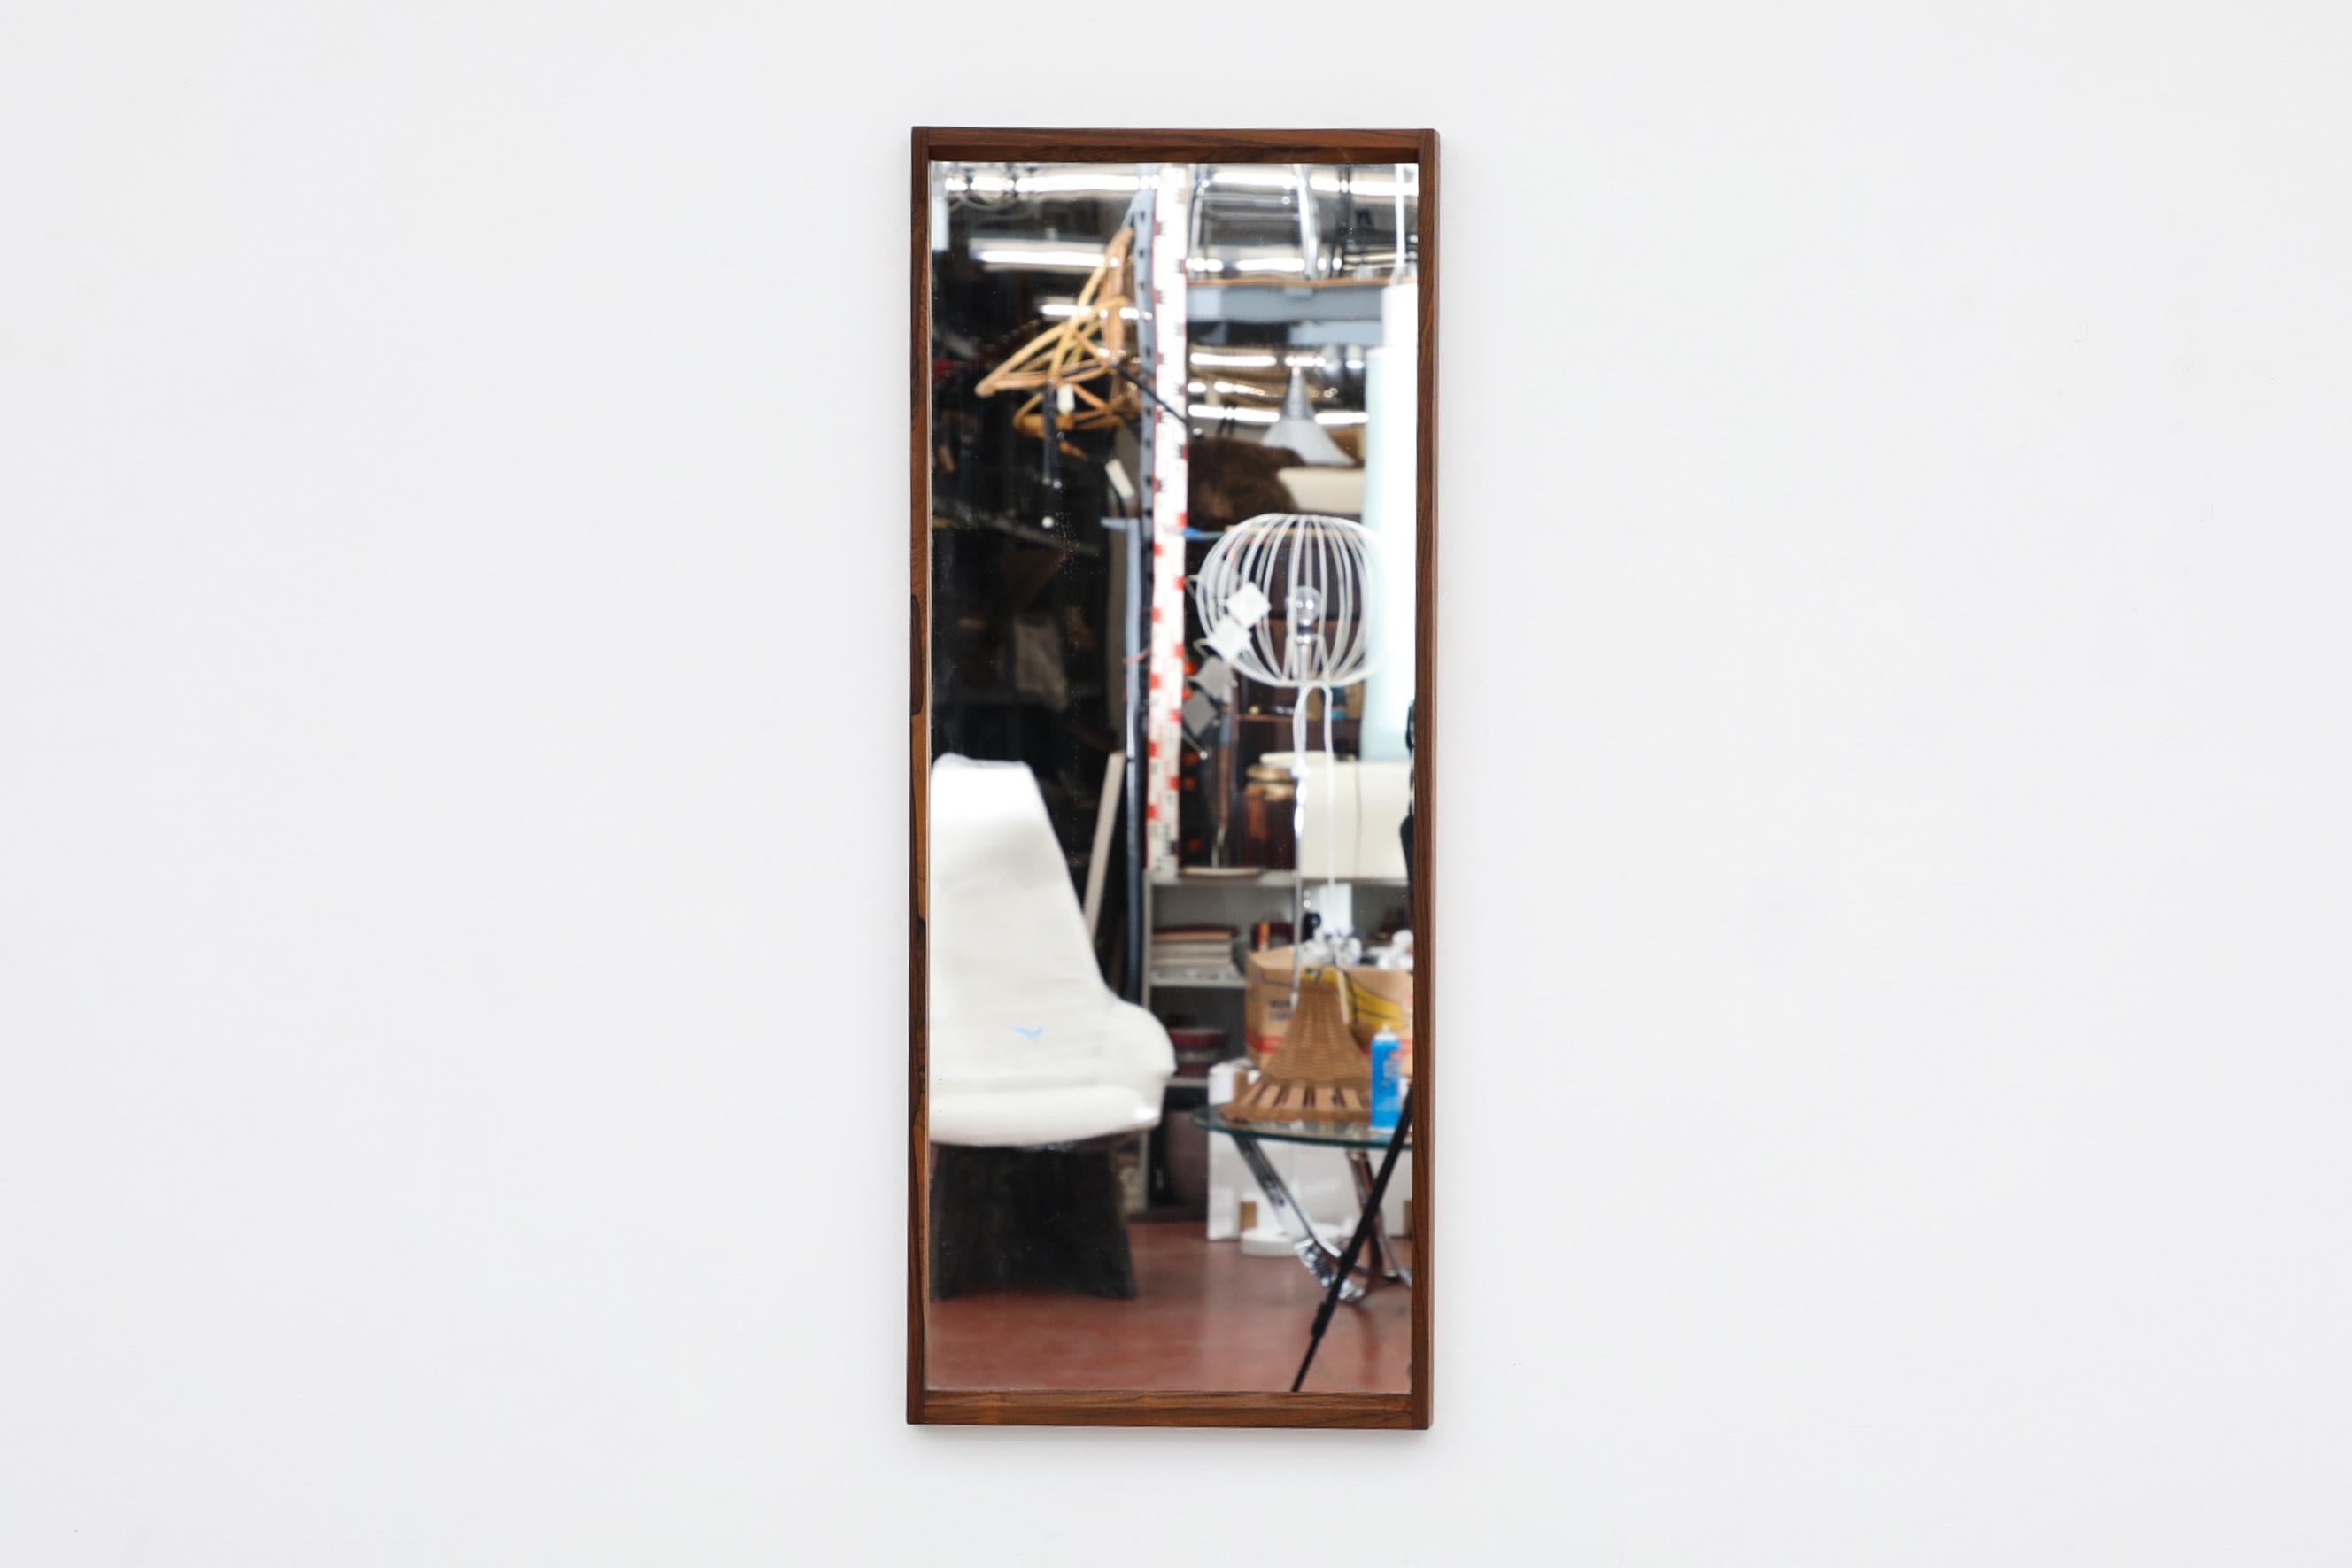 Midcentury Danish mirror with a rectangle rosewood frame with beautiful peg fastening detail. It's in original condition with visible patina consistent with its age and use.